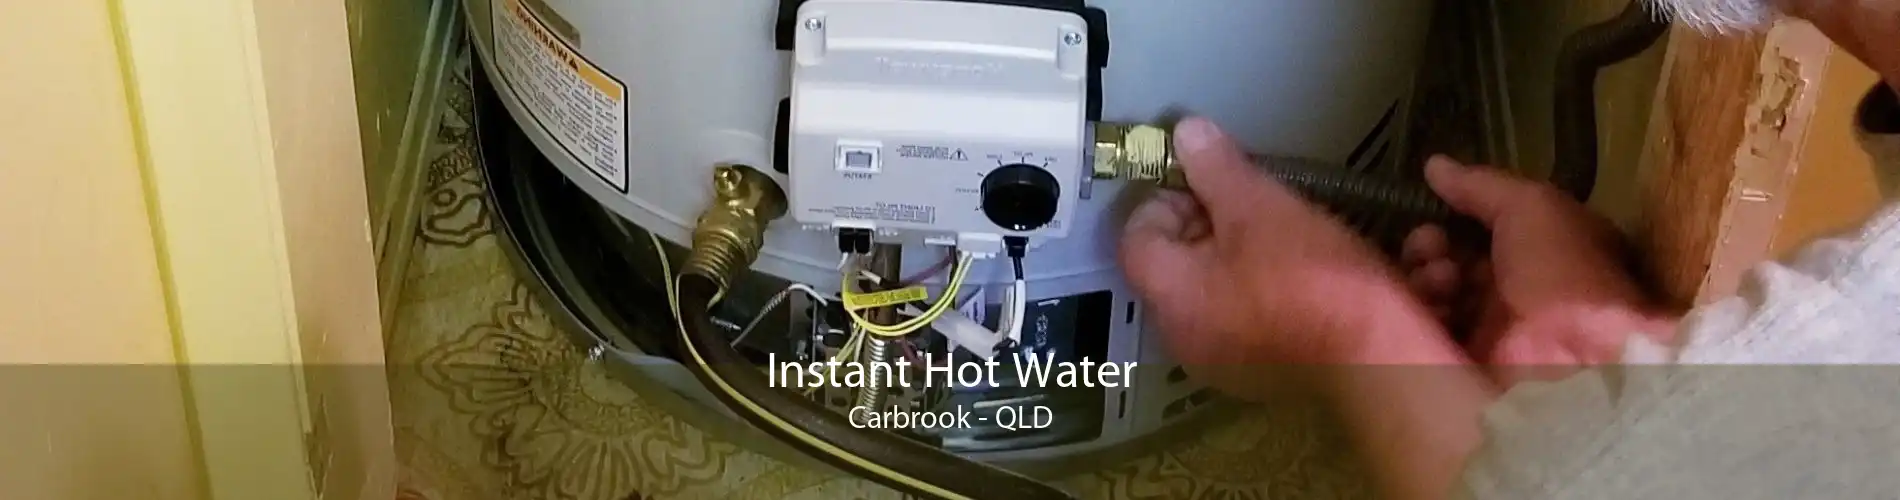 Instant Hot Water Carbrook - QLD